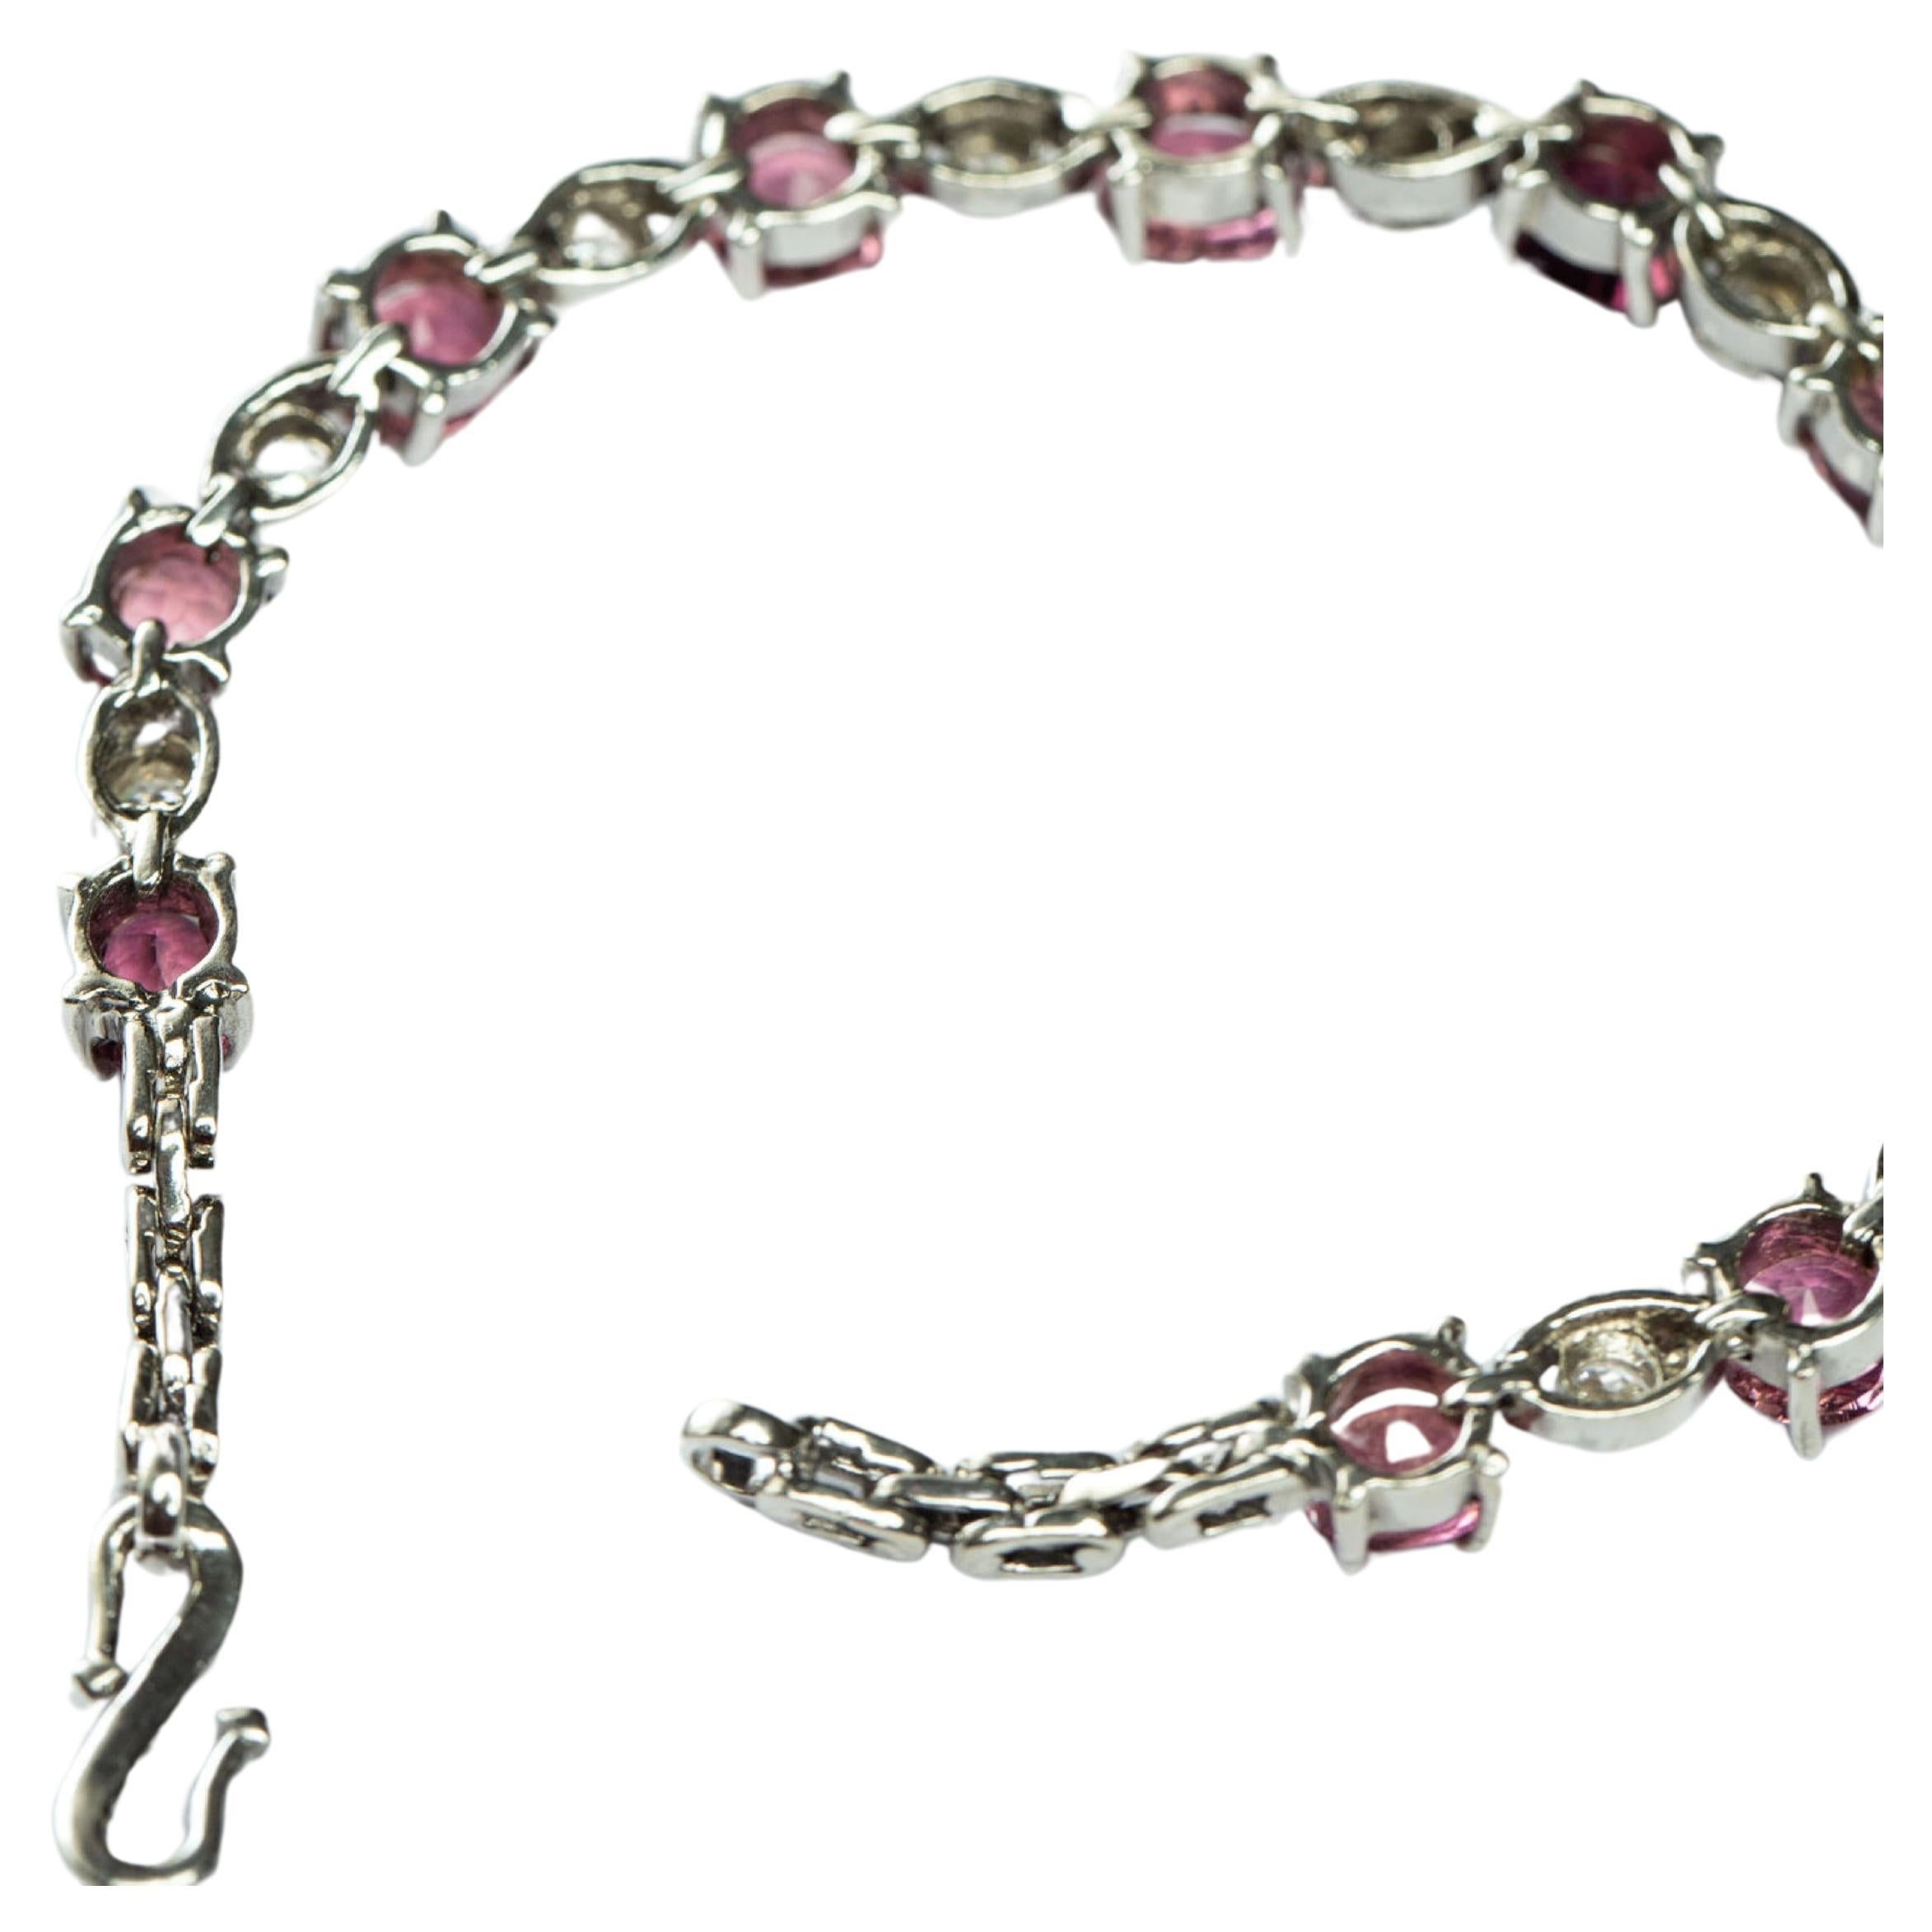 8.25ctw Round Cut Pink Tourmaline Tennis Bracelet  In New Condition For Sale In Sheridan, WY